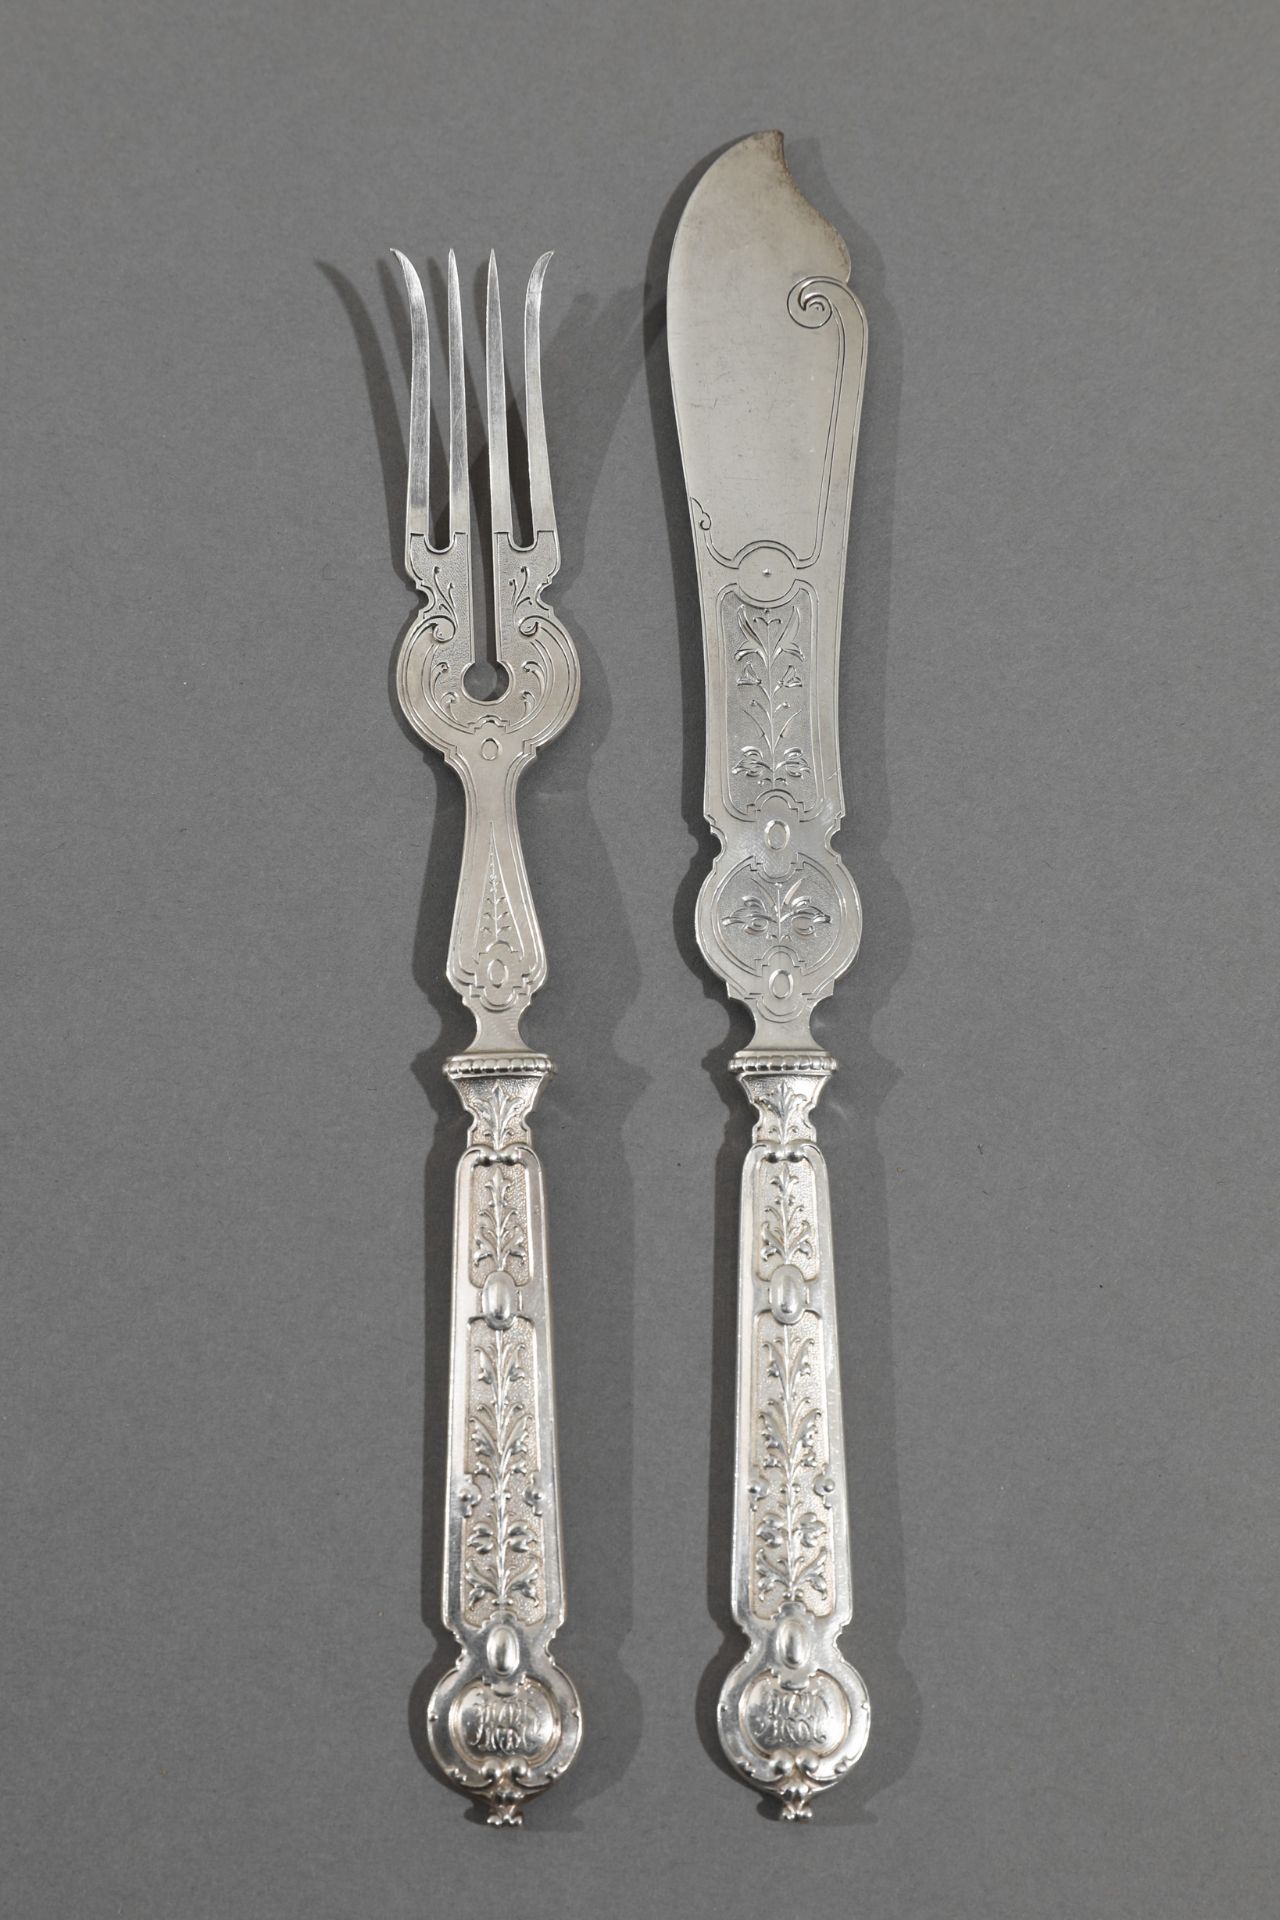 G. Hermeling for Wilkens Söhne, Bremen, 118-piece cutlery set with serving pieces - Image 5 of 11